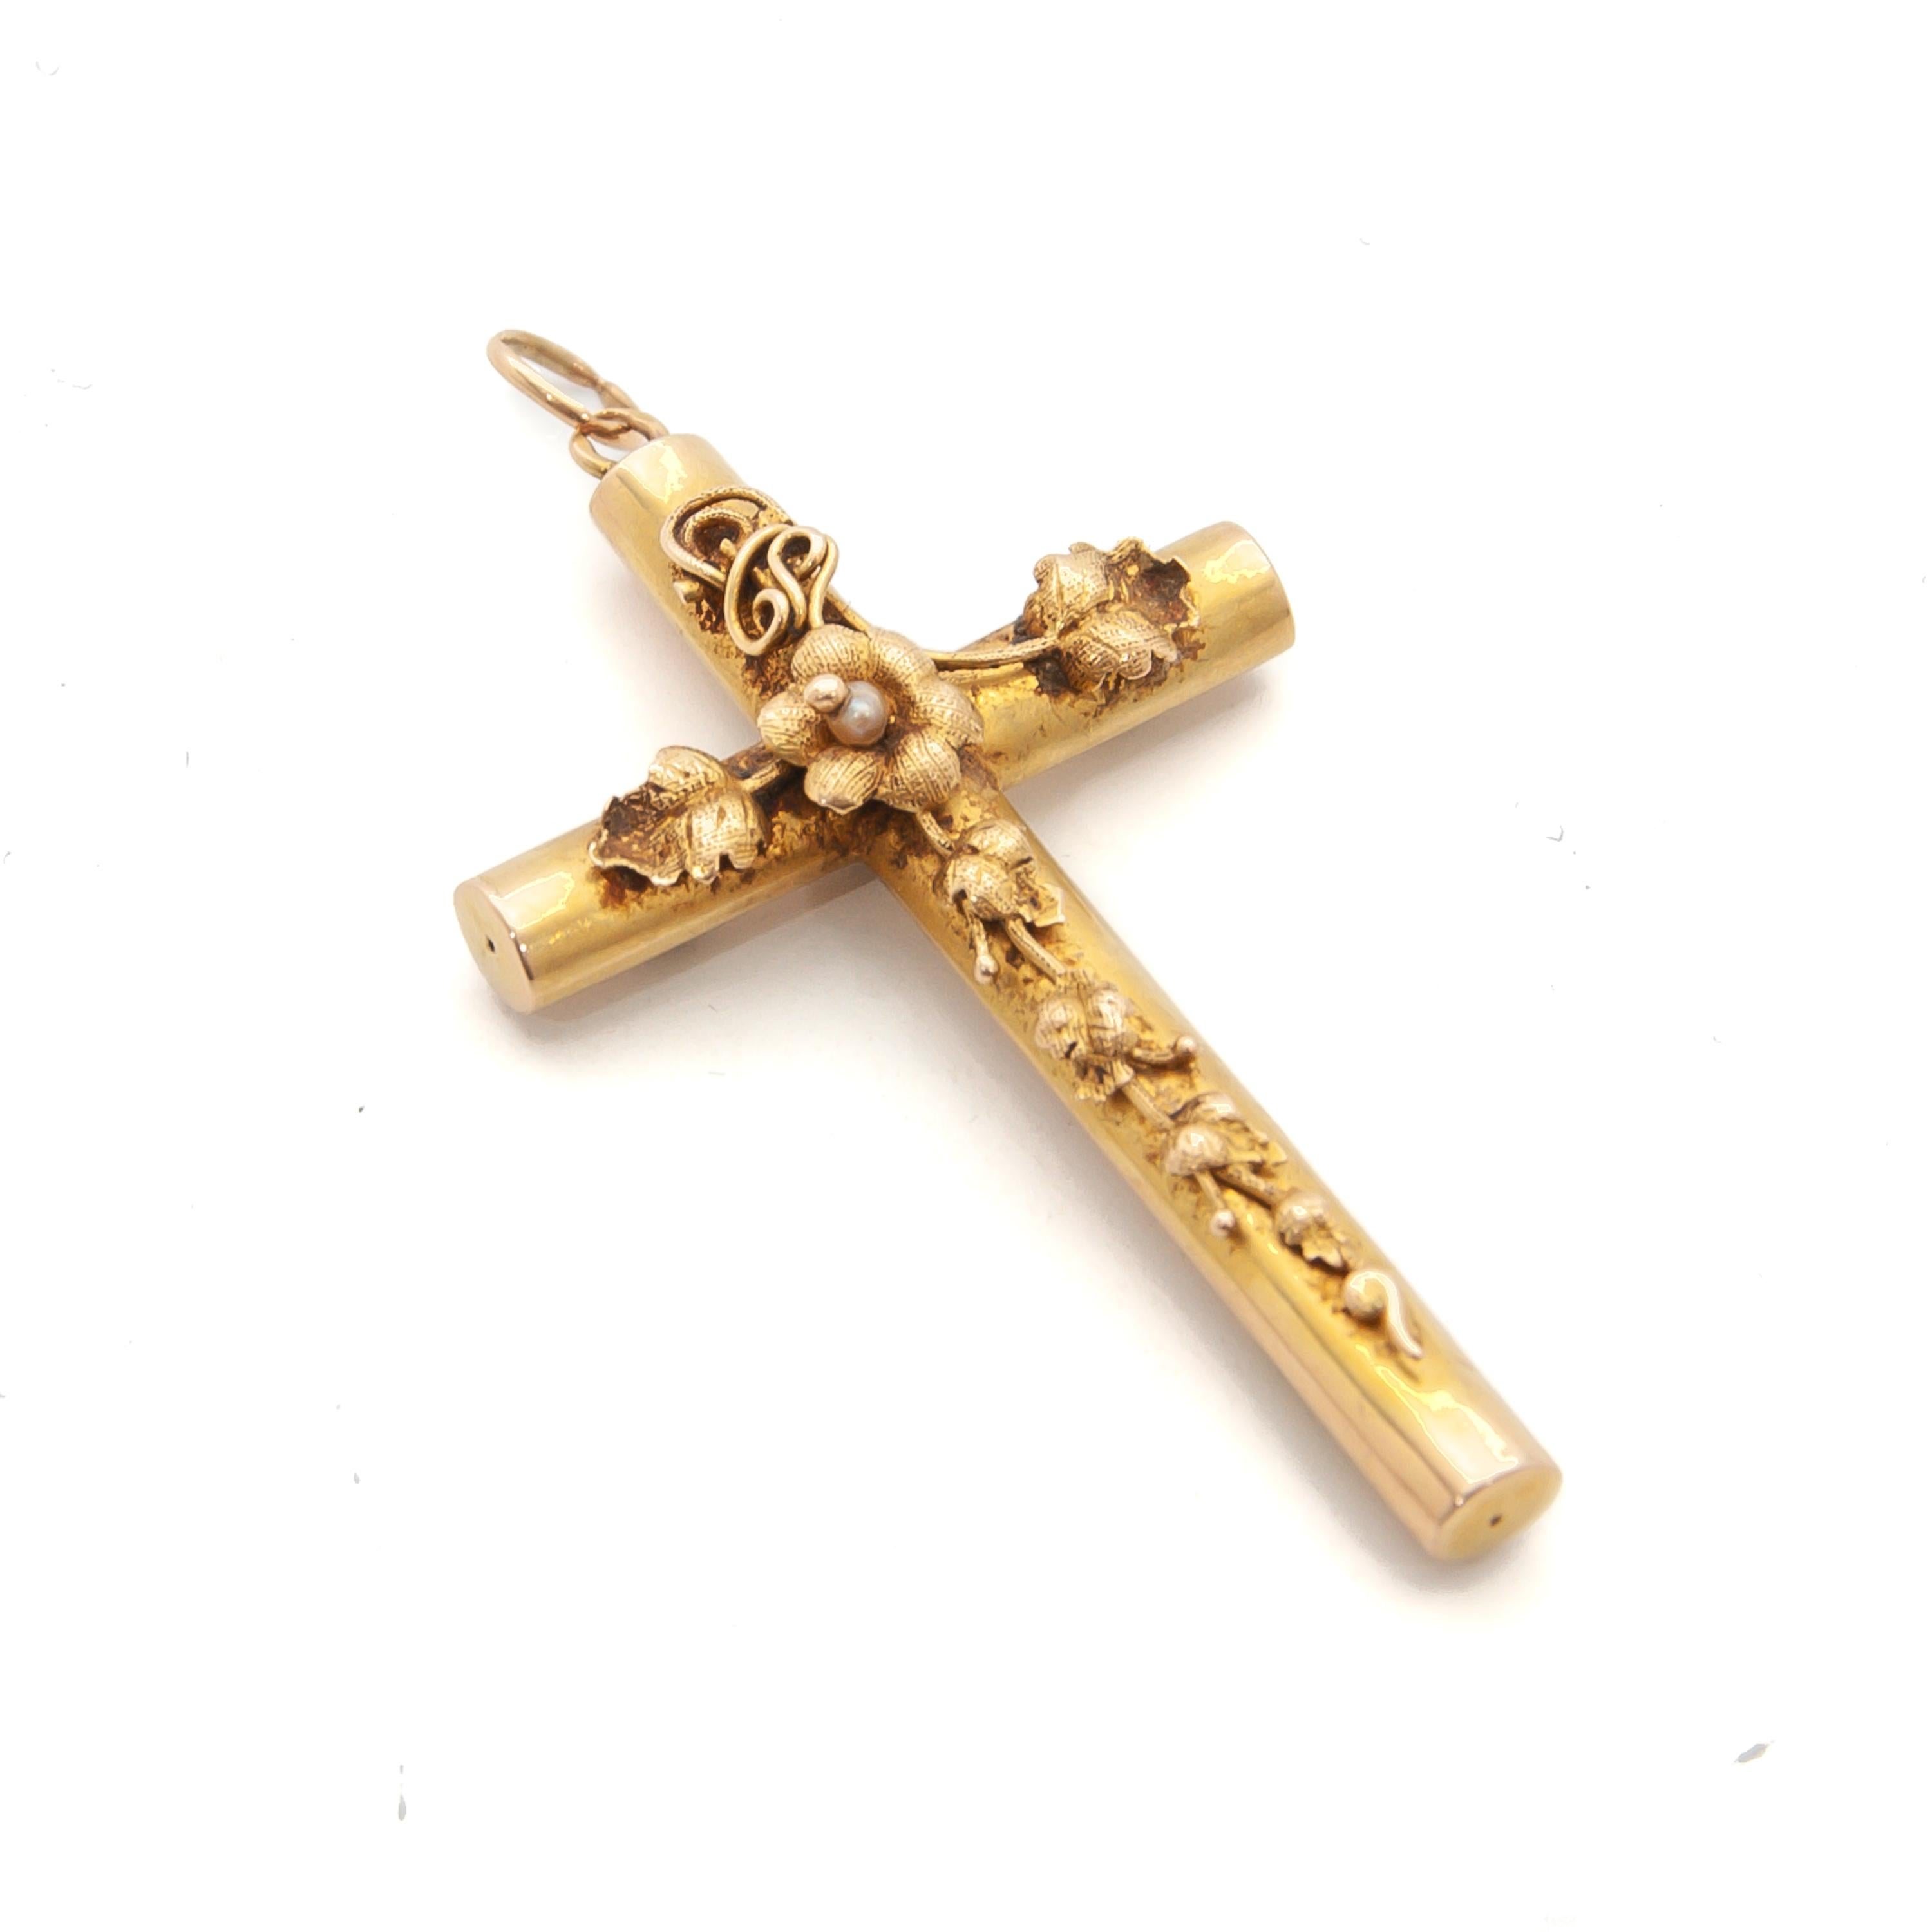 An antique Victorian cross pendant crafted in 14 karat yellow gold created with a chased ornamental decor. The design of the cross is embellished with tendril and leaf motifs from top to bottom. In the center of the crossed bars a cannetille flower